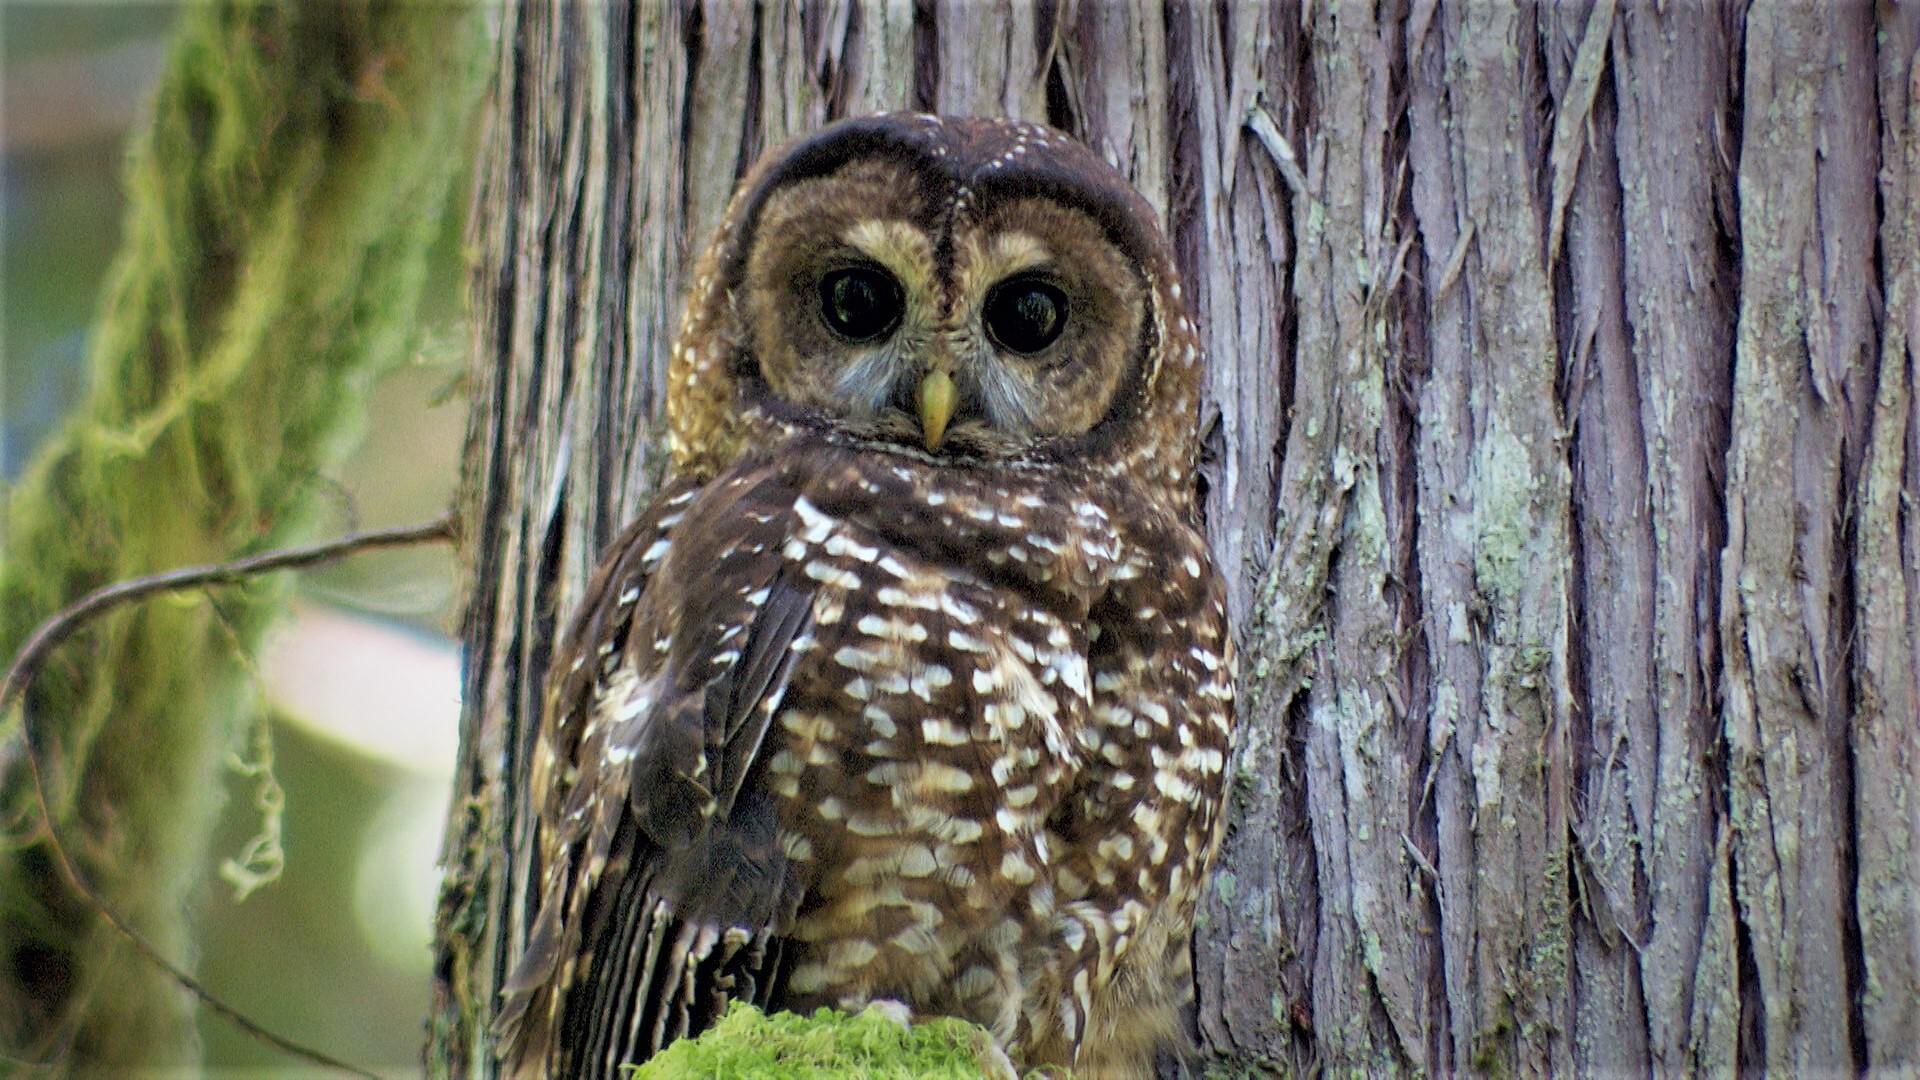 Petition · Don't Stop Making The Owl House - Diversity is